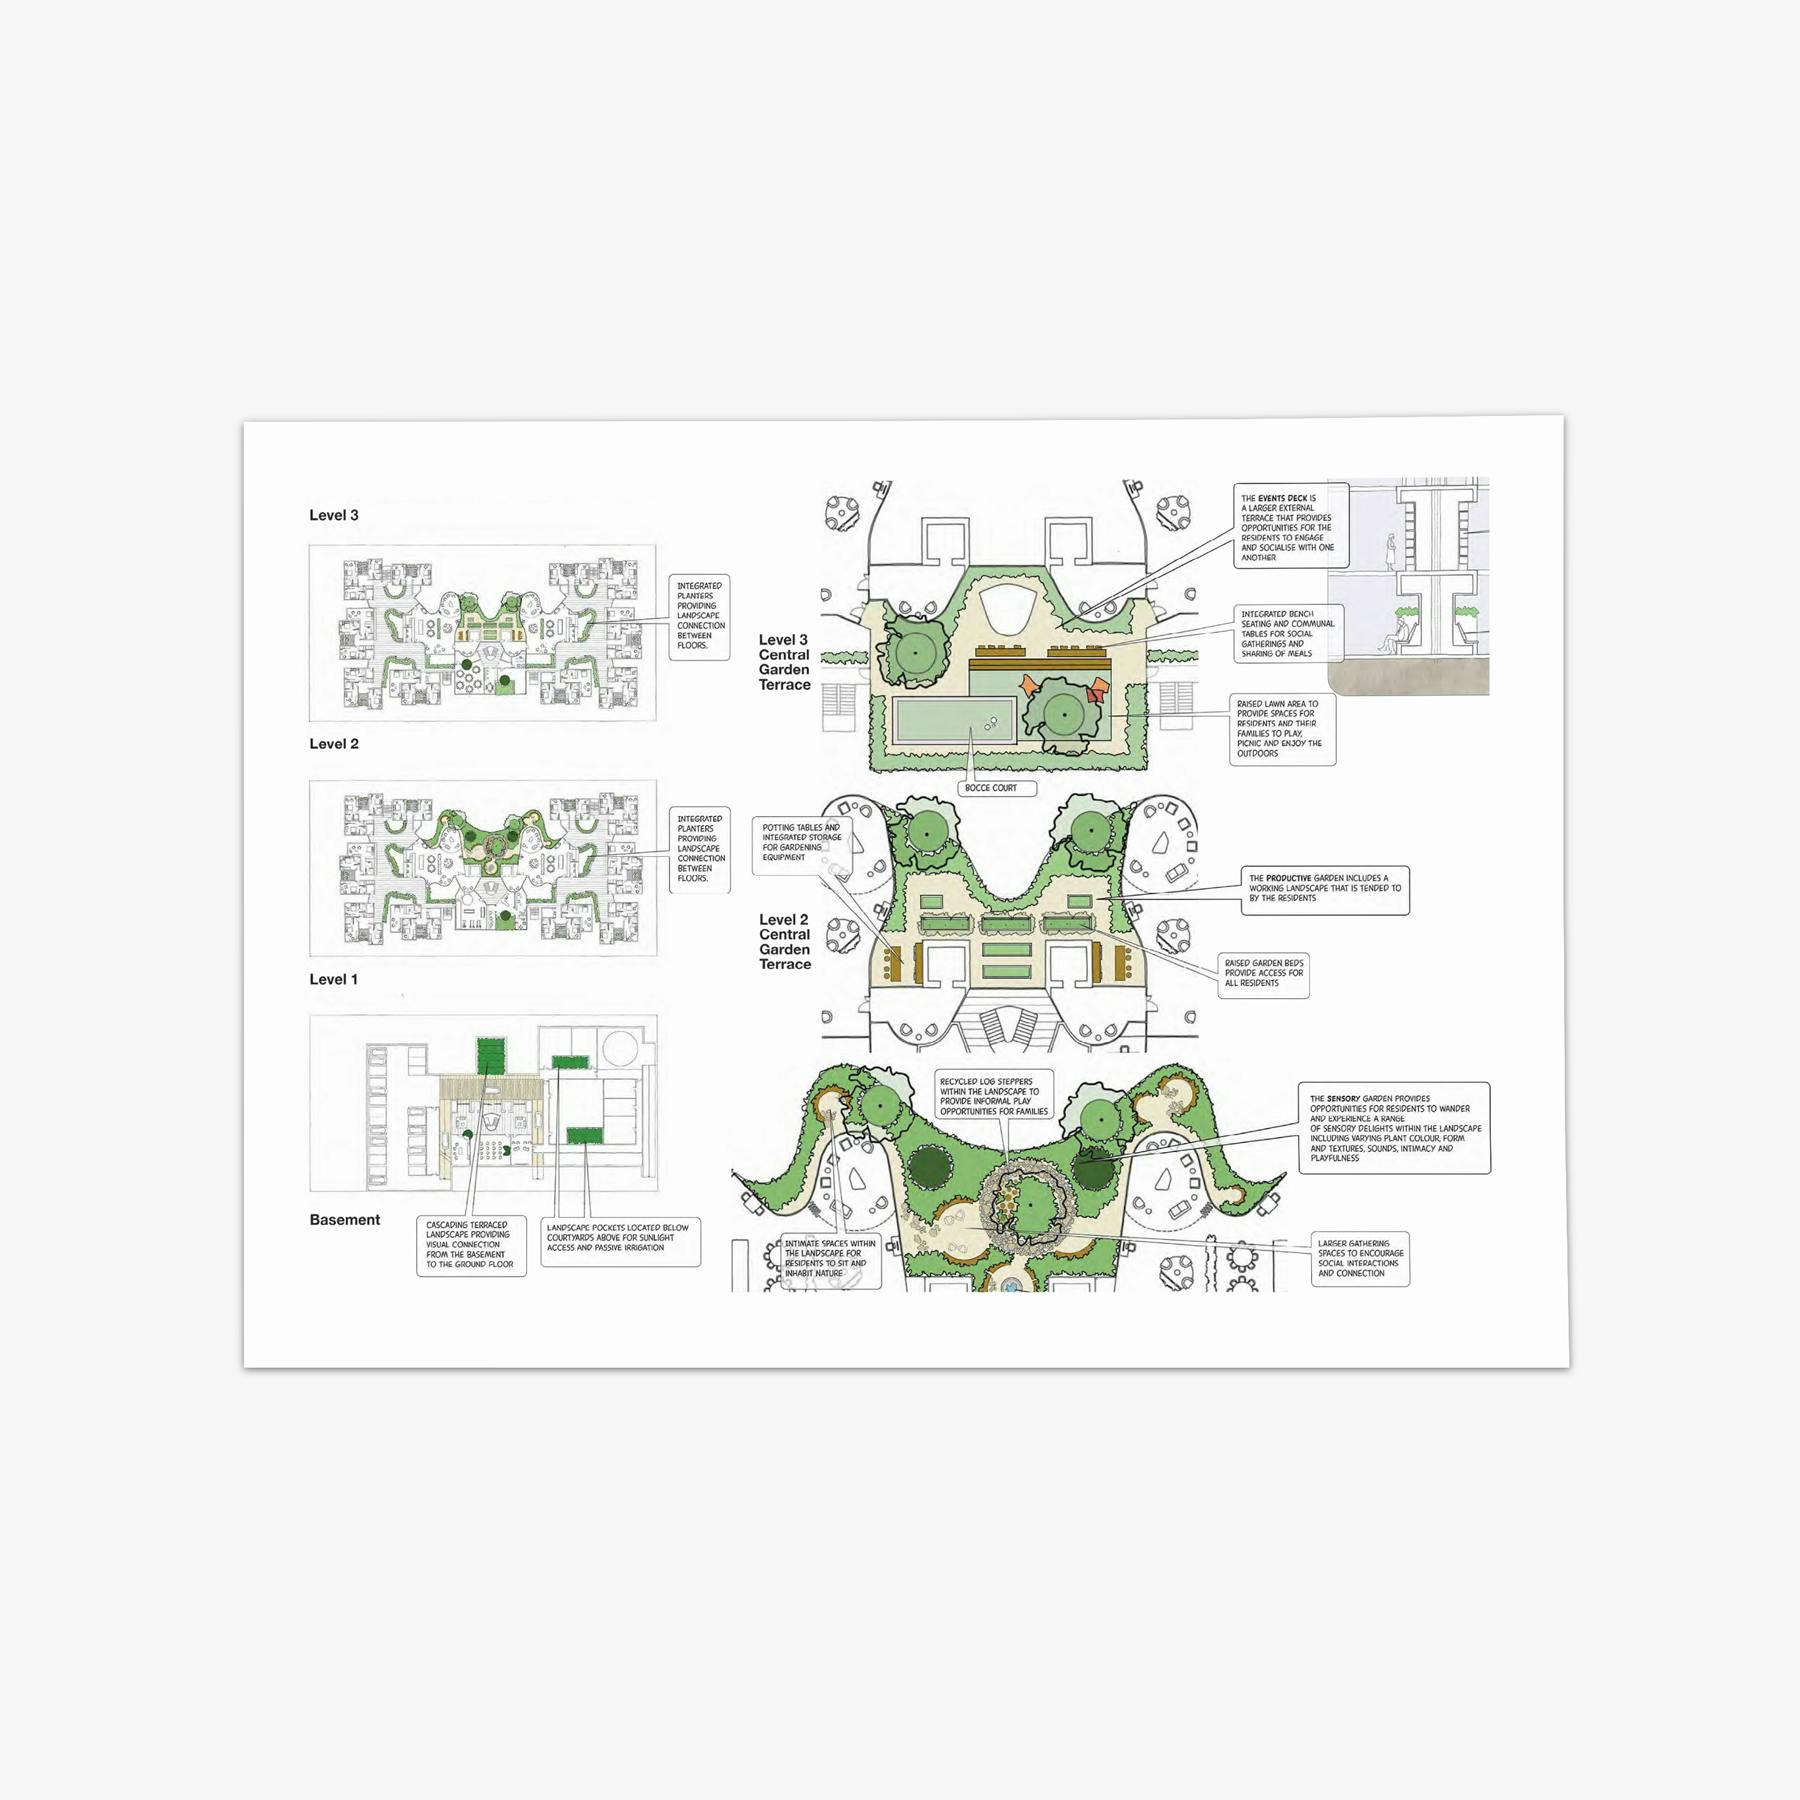 A digital mock-up of a sheet of paper filled with colourful architectural diagrams.